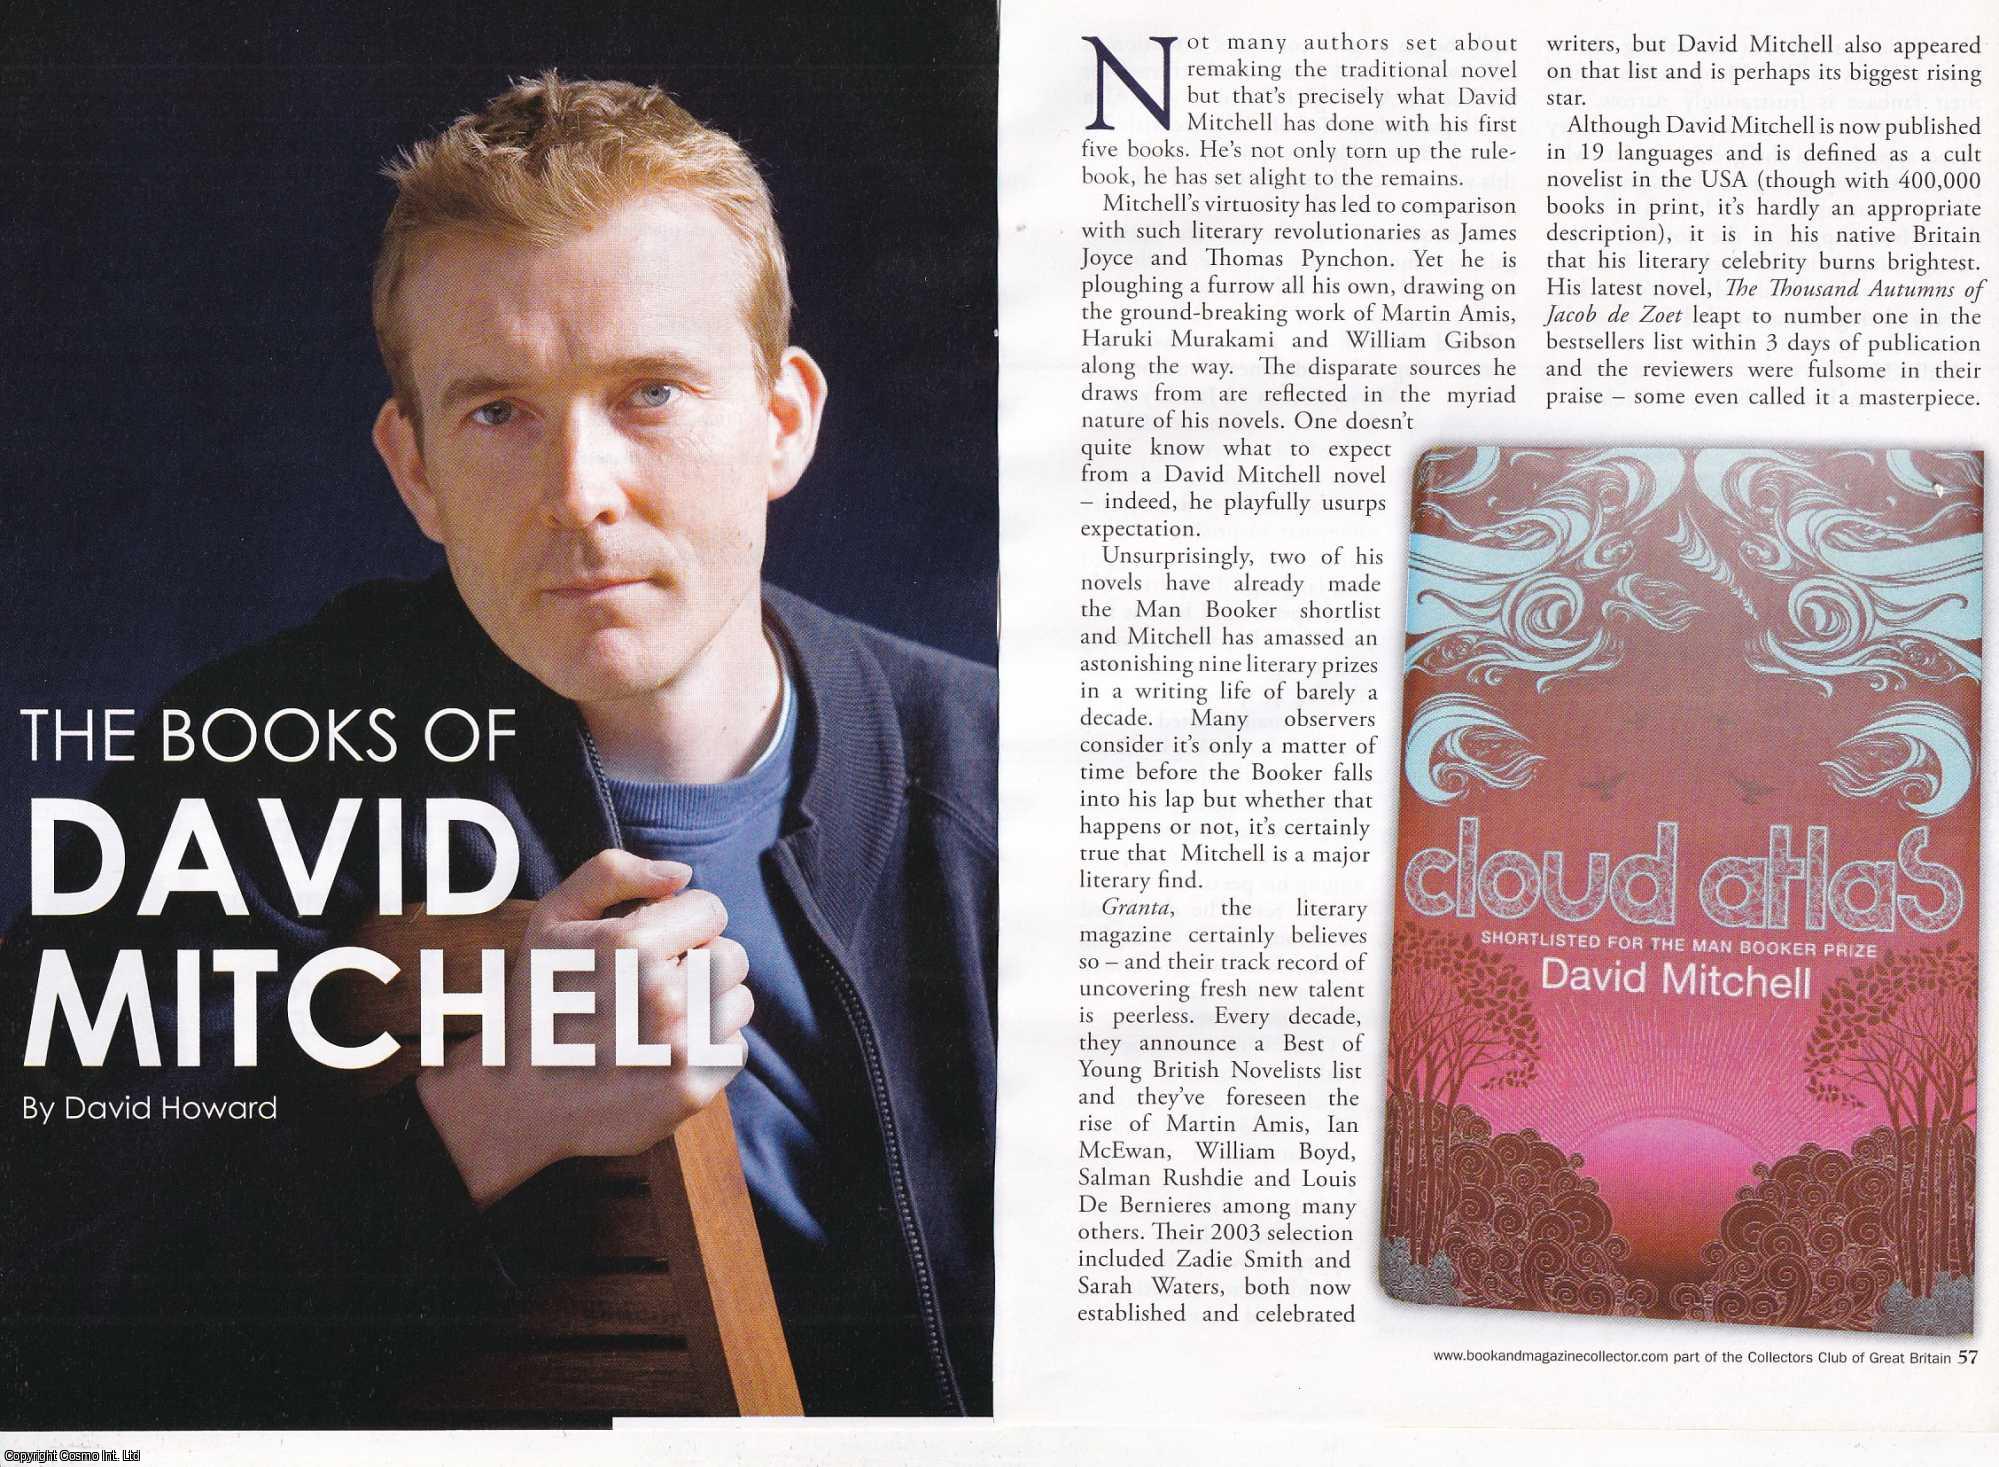 David Howard - The Books of David Mitchell. This is an original article separated from an issue of The Book & Magazine Collector publication, 2010.